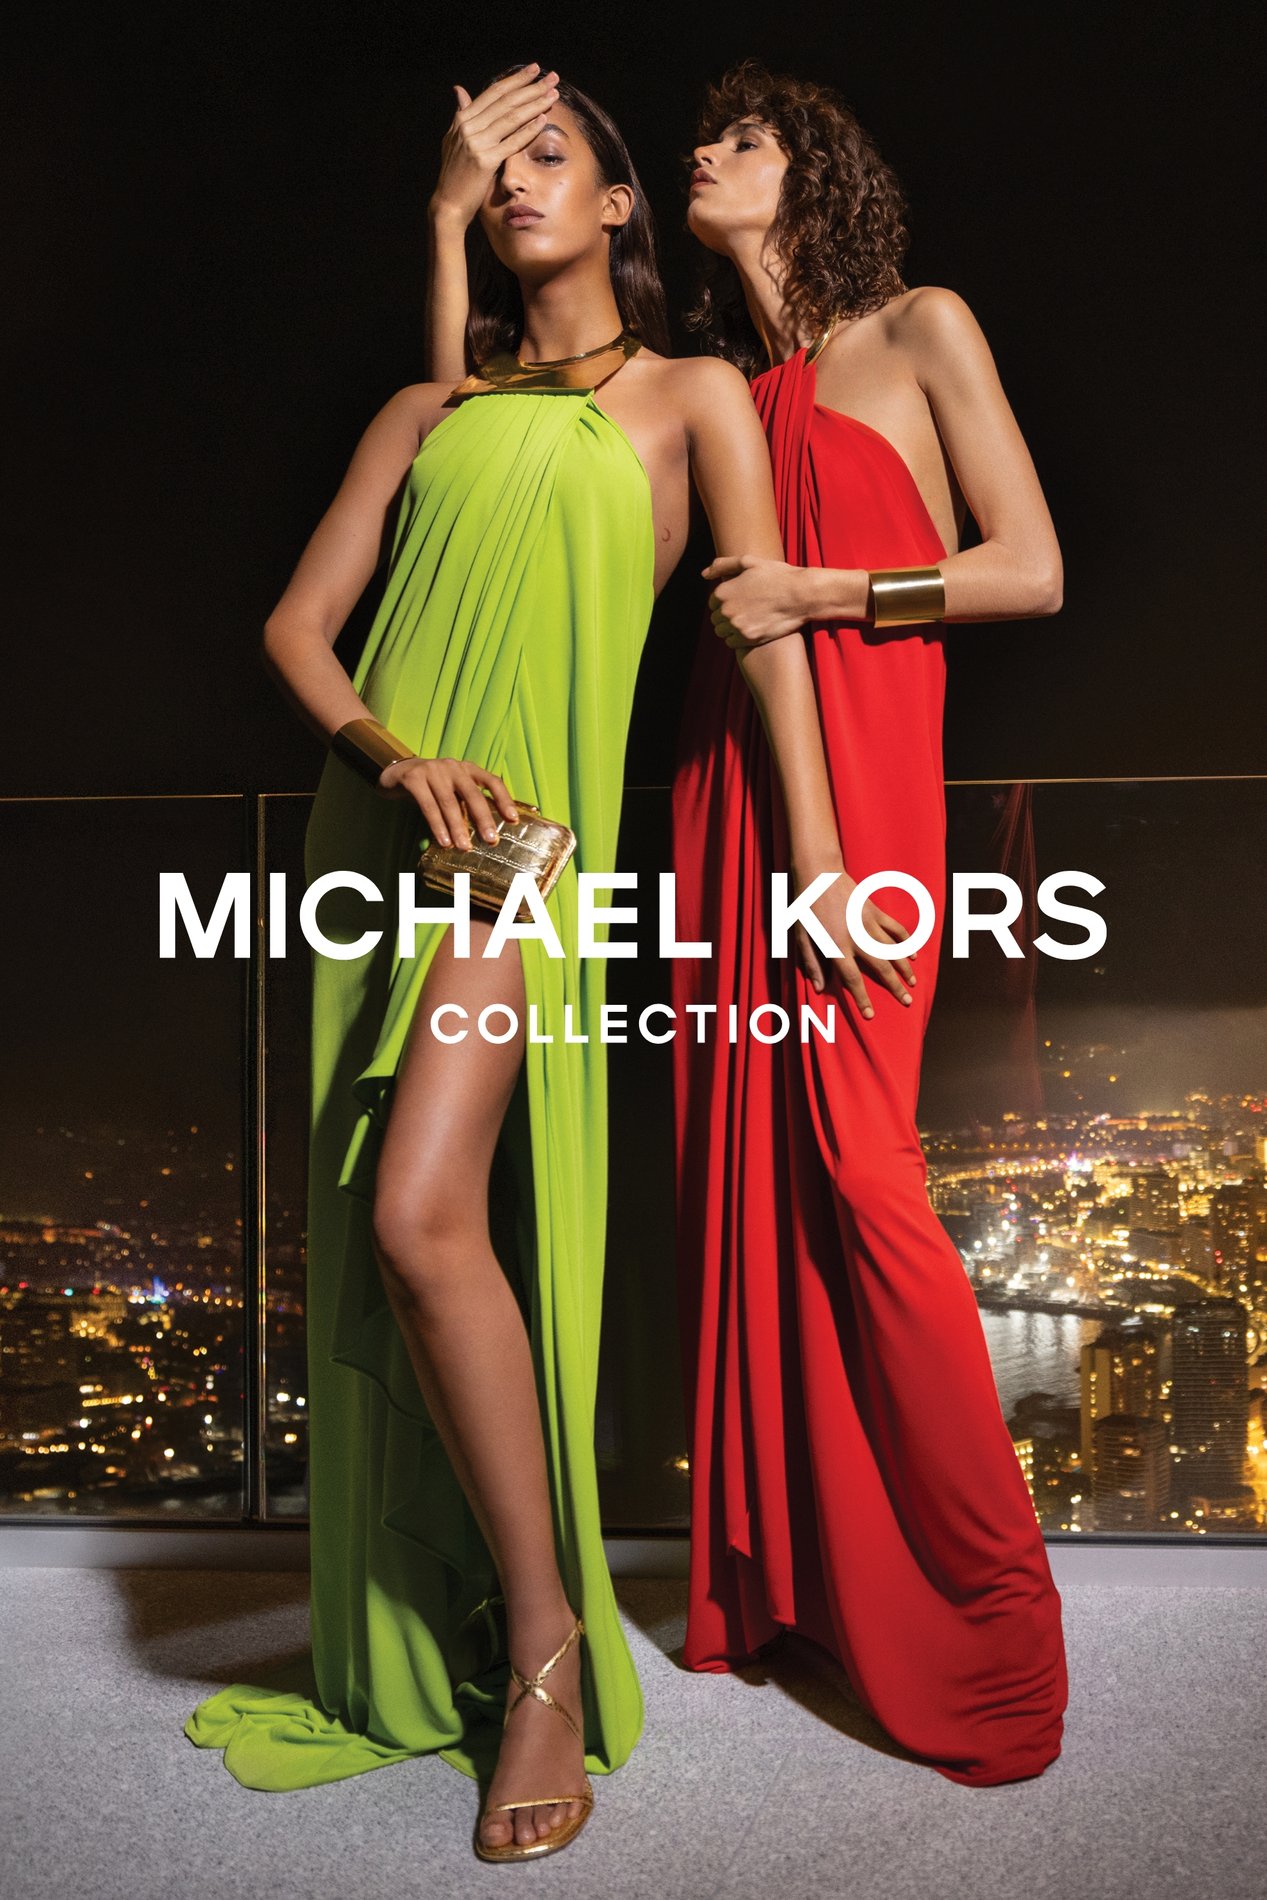 Michael Kors FROM THE RUNWAY